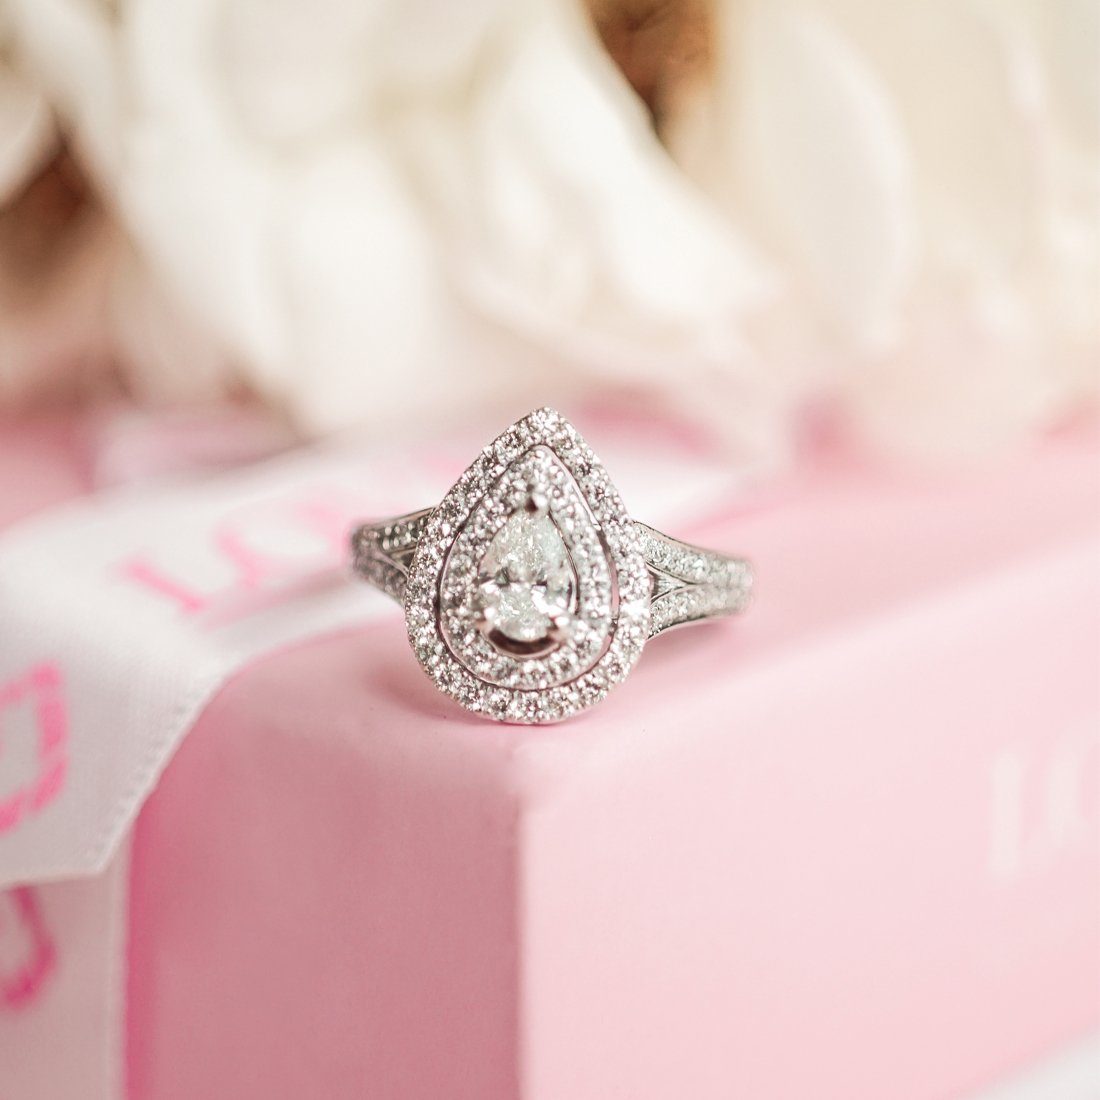 Love by Michelle Beville Double Halo Solitaire Pear Ring with 1.00ct of Diamonds in 18ct White Gold Rings Bevilles 